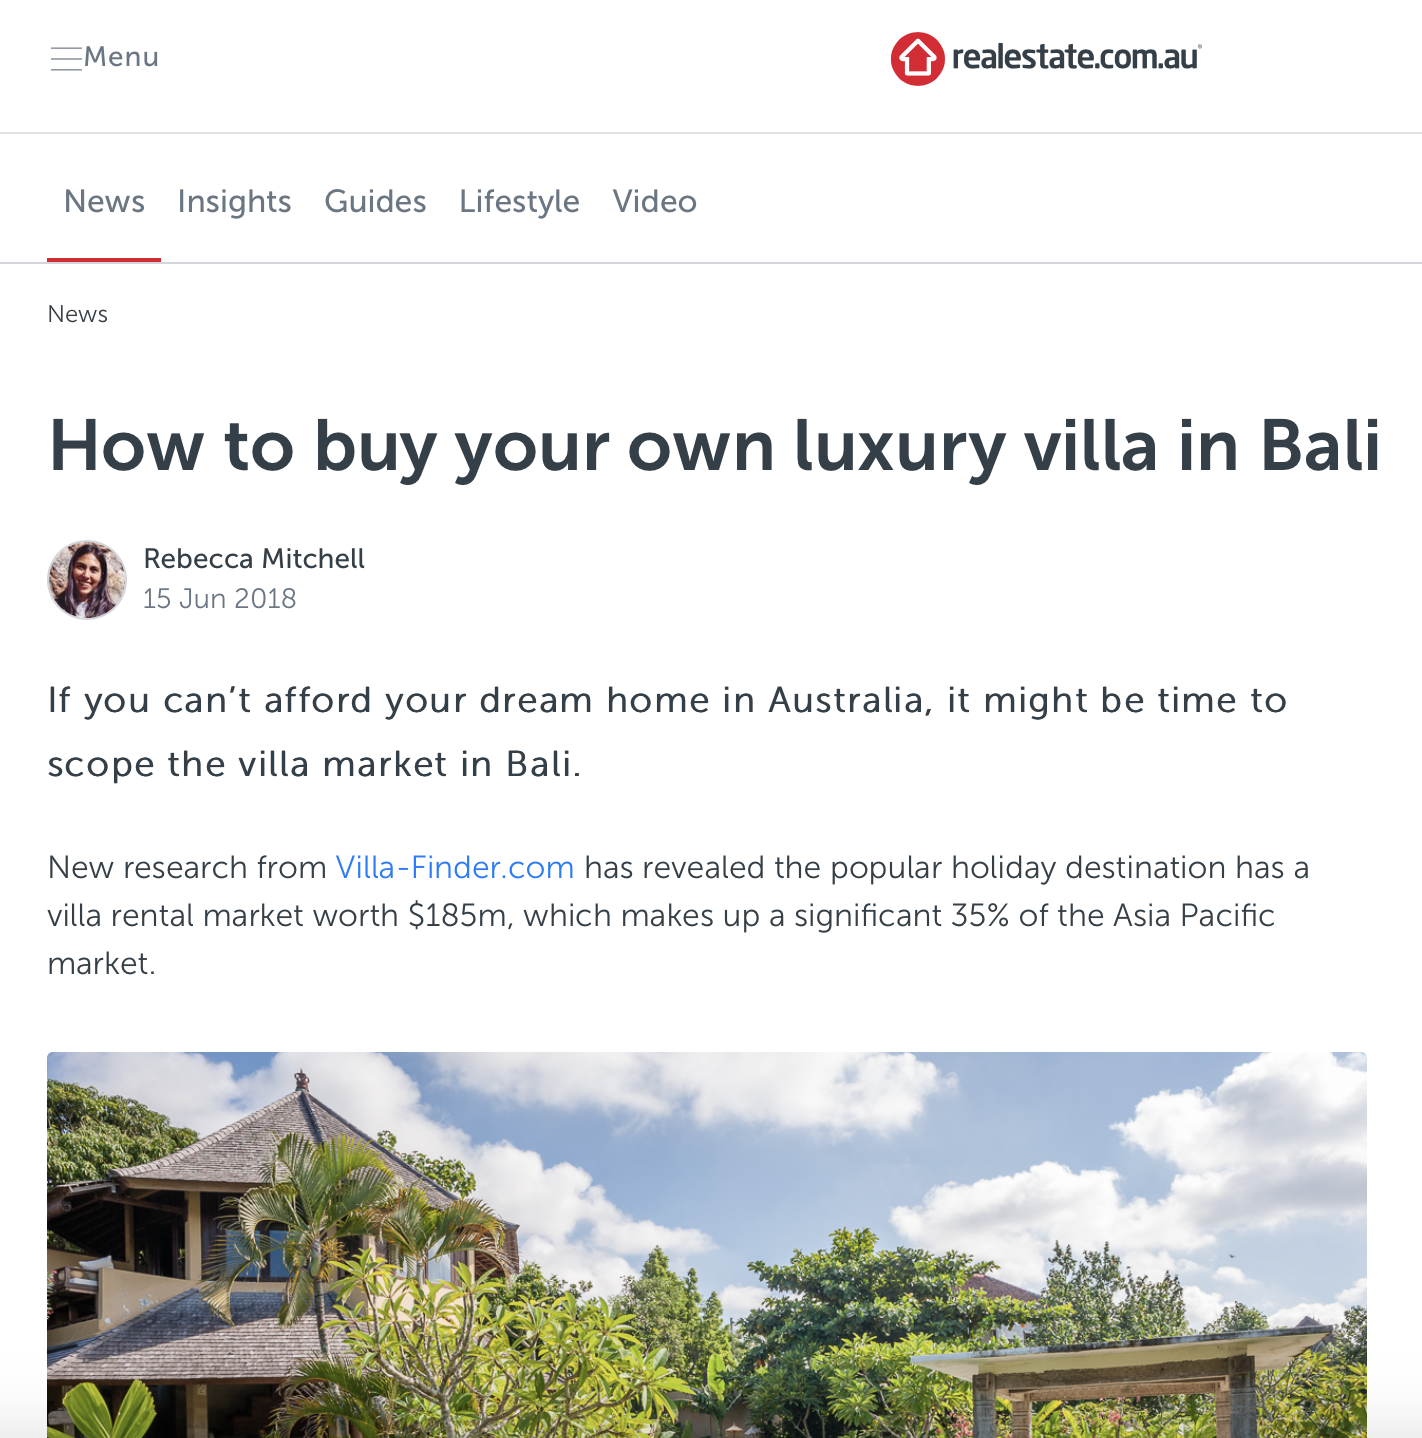 Ever wanted to know how to buy a villa in Bali?